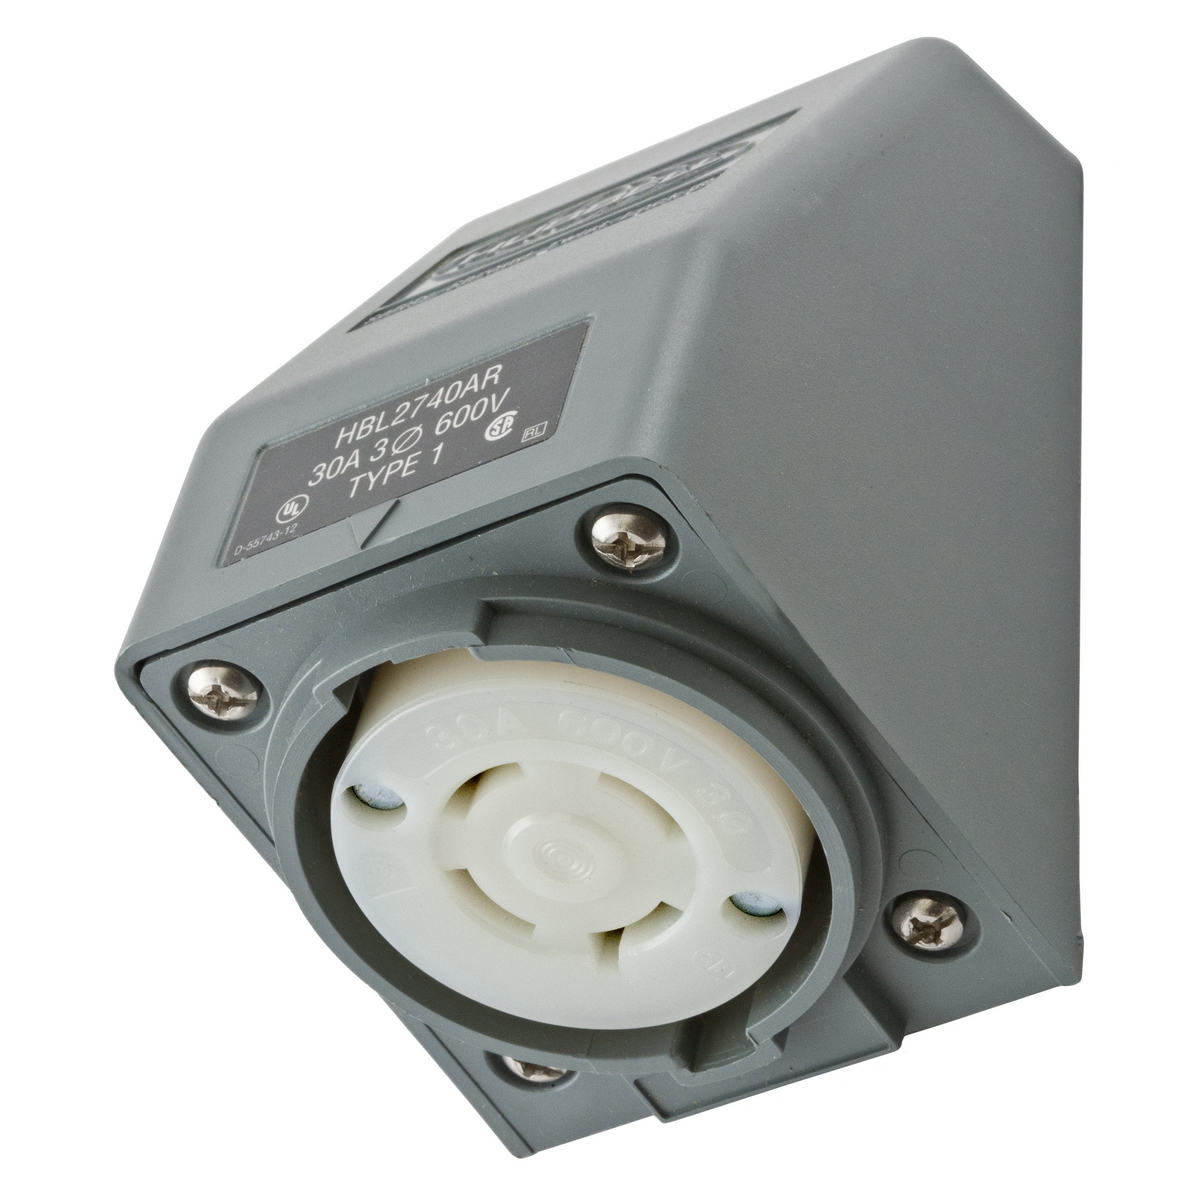 Isolated Ground Twist-Lock® Receptacles - Hubbell Wiring Device